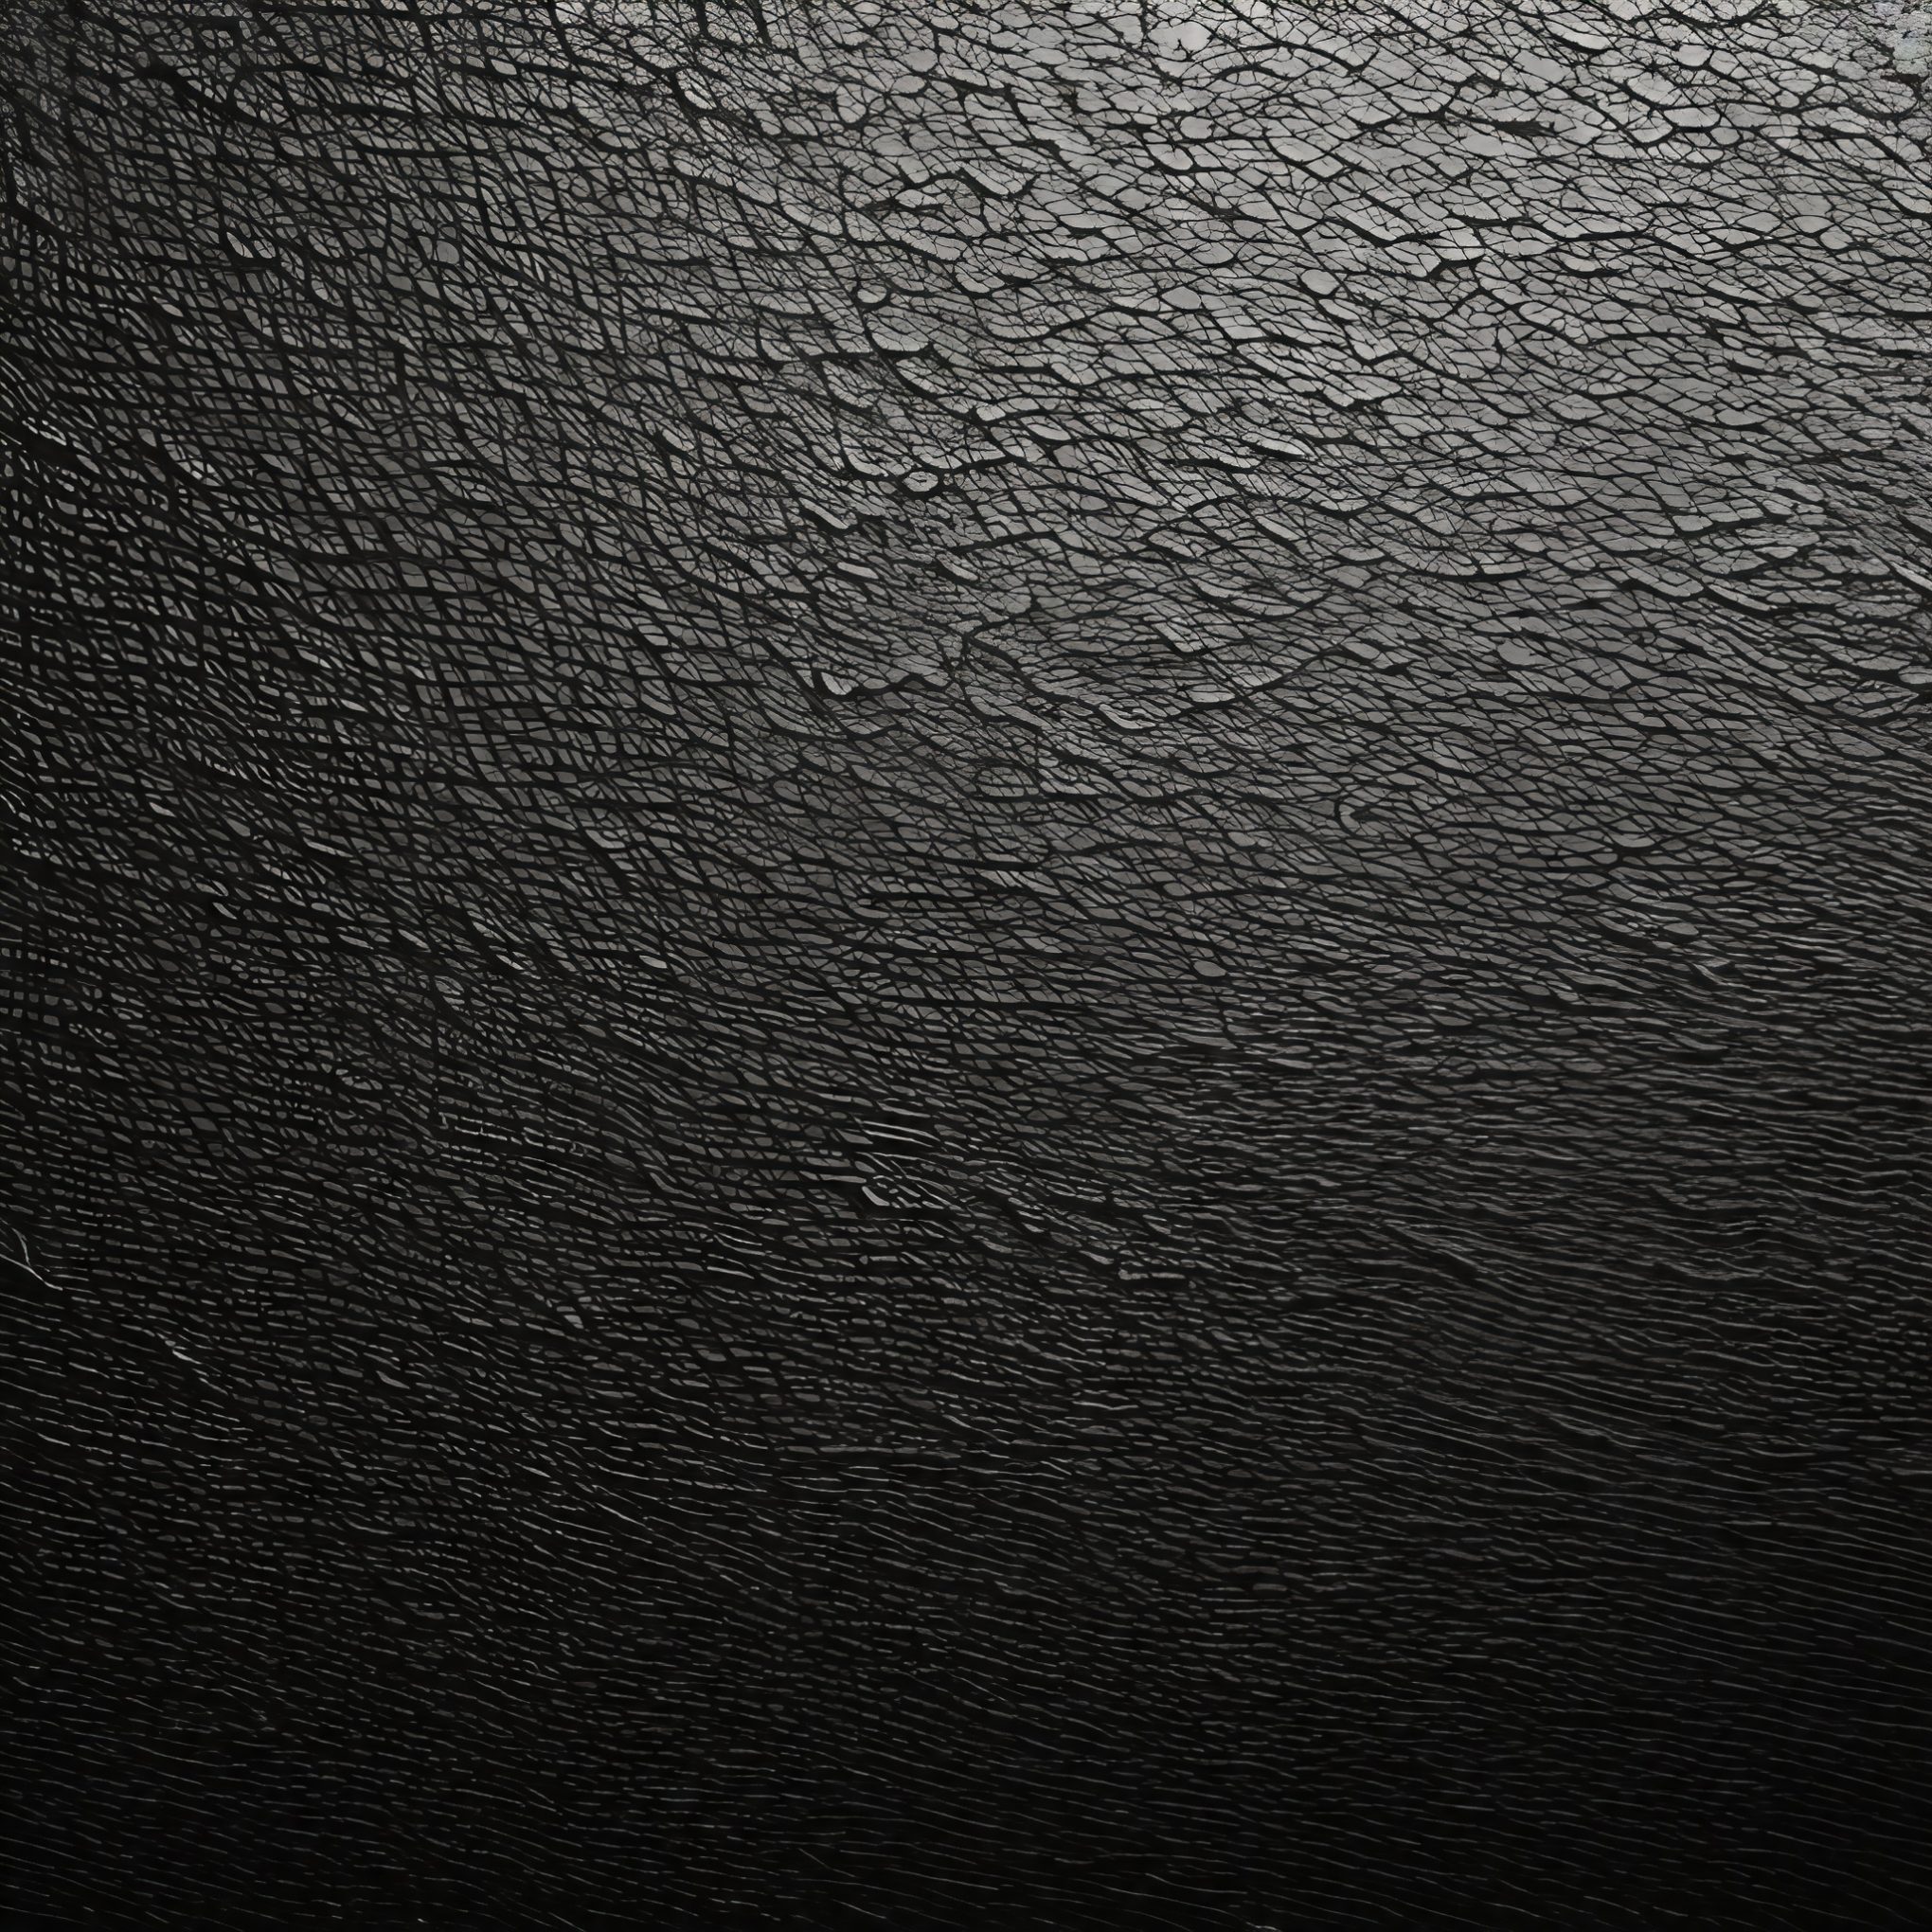 Flaking Black Wall Paint Textured Background